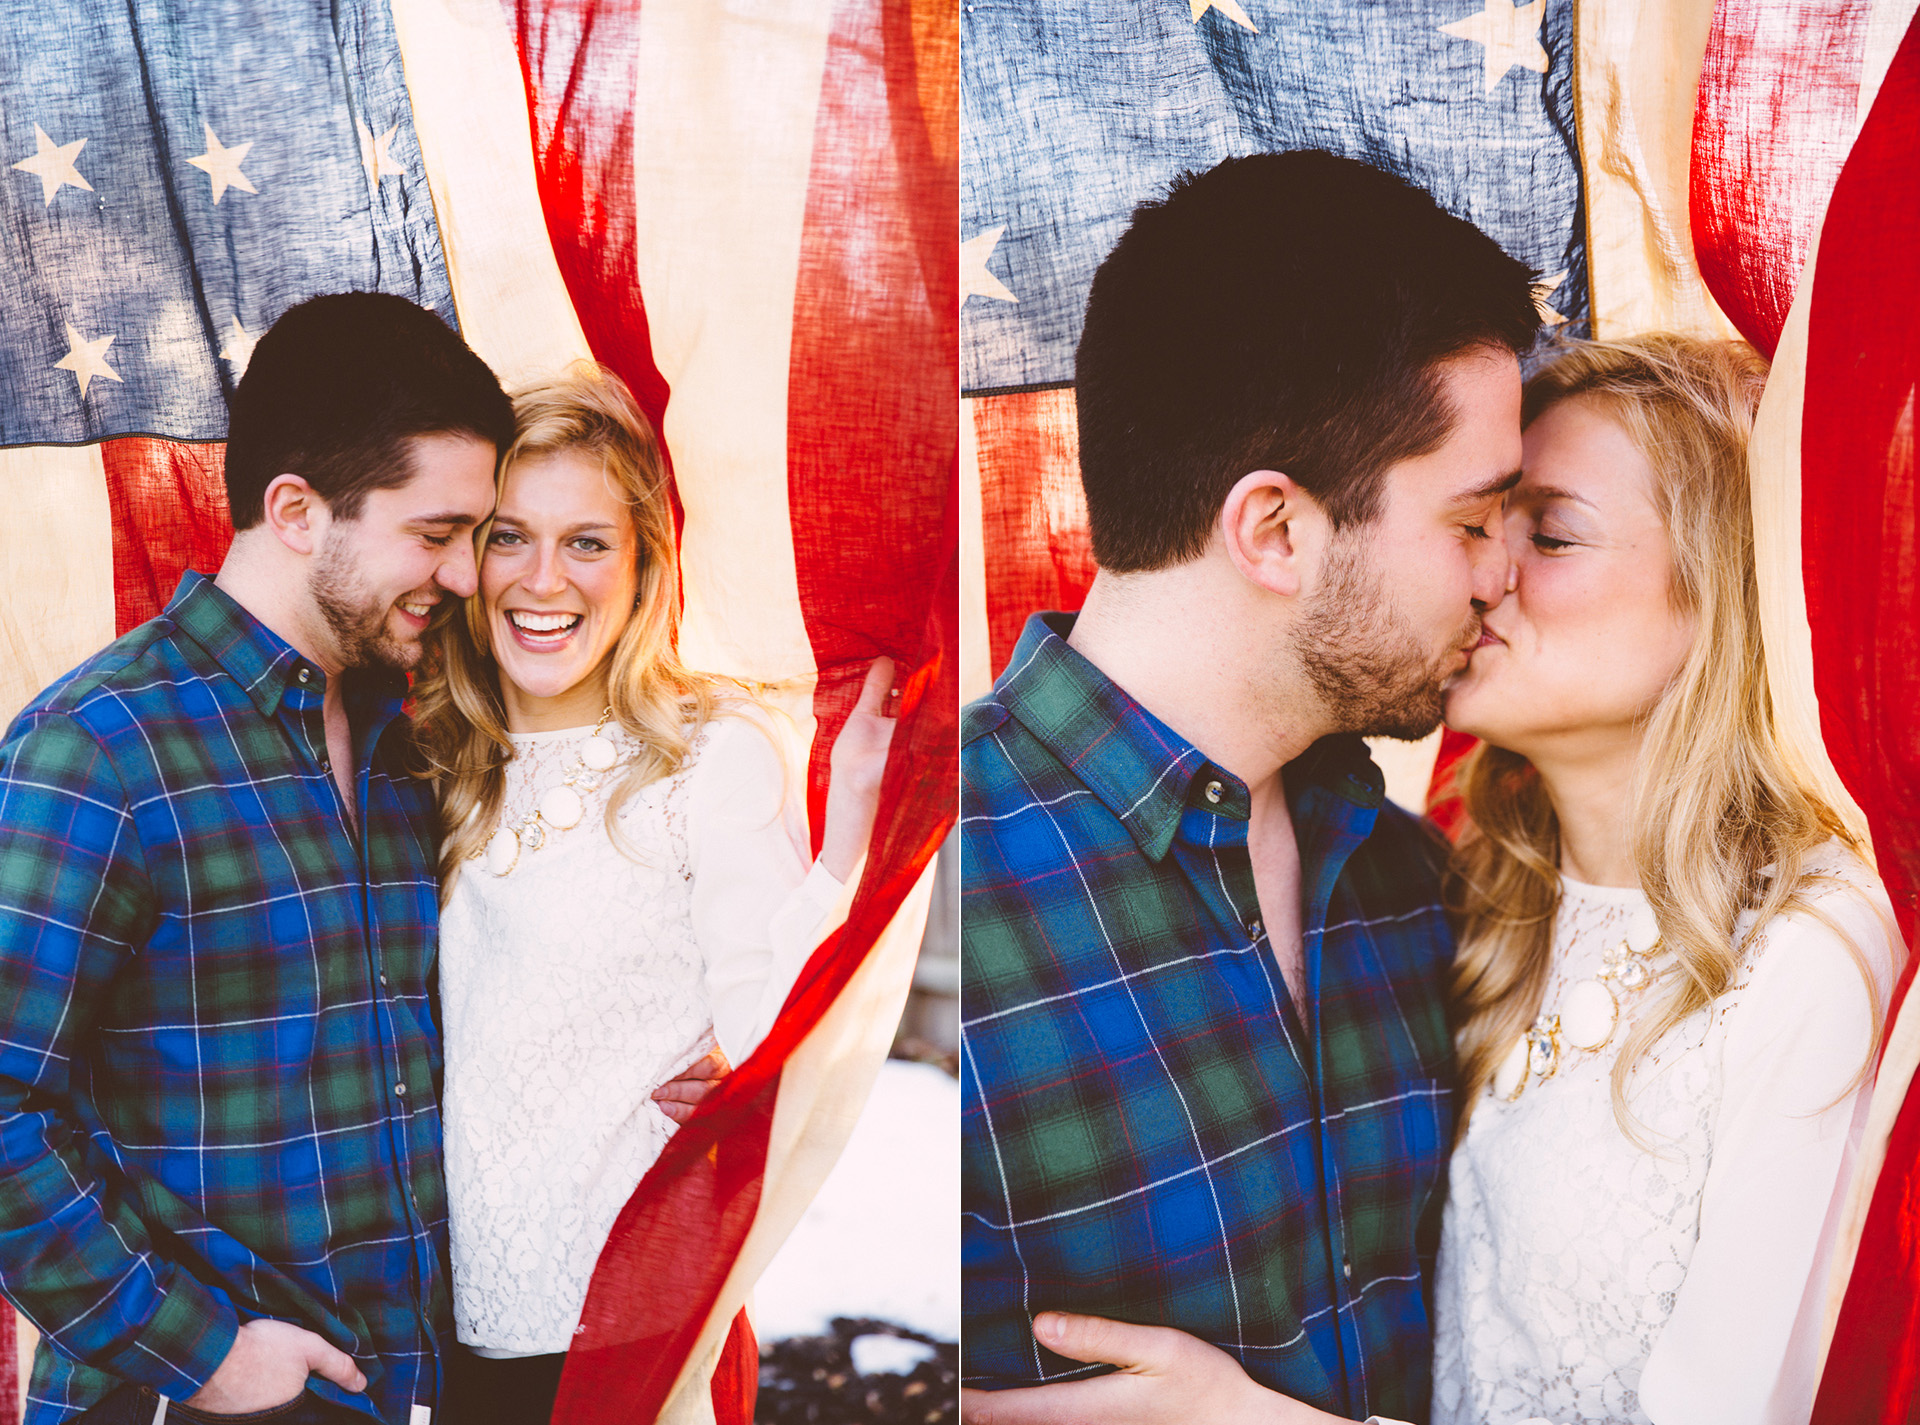 Winter Engagement Session in Bay Village - Too Much Awesomeness - Cleveland Wedding Photographer 09.jpg